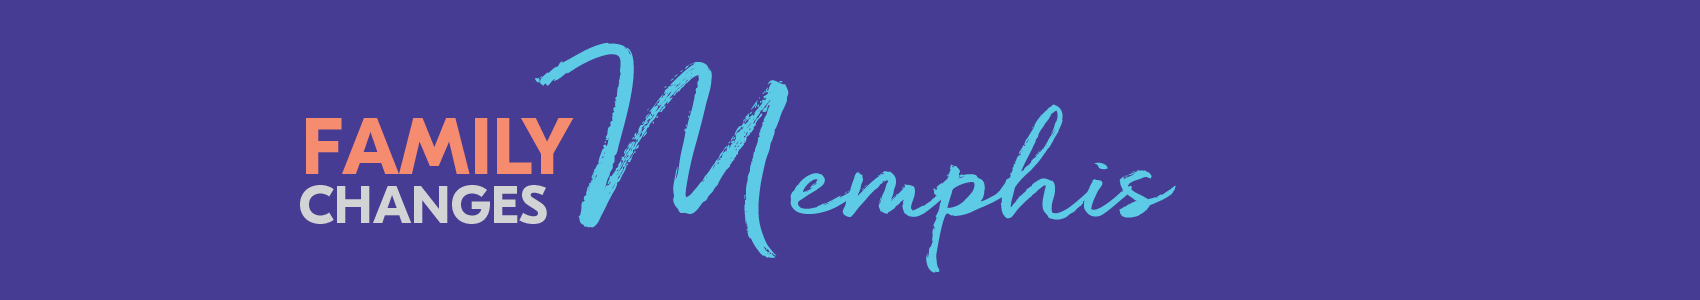 Family Changes Memphis- SFFC banner